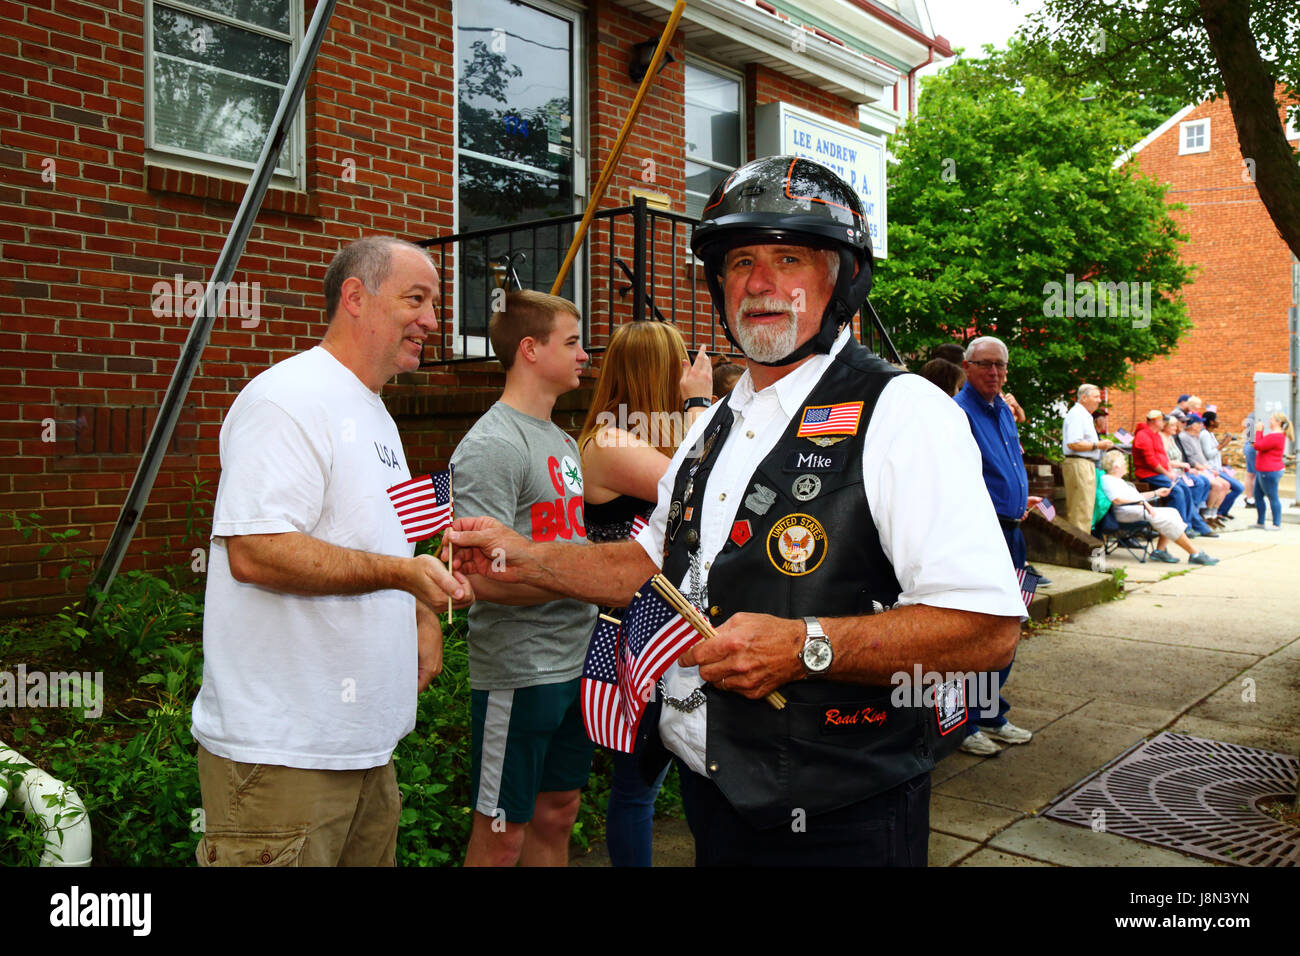 Westminster, Maryland, USA. 29th May, 2017. A former Navy serviceman hands out America flags to spectators at the start of parades for Memorial Day, a federal holiday in the United States for remembering those who died while serving in the country's armed forces. Credit: James Brunker/Alamy Live News Stock Photo